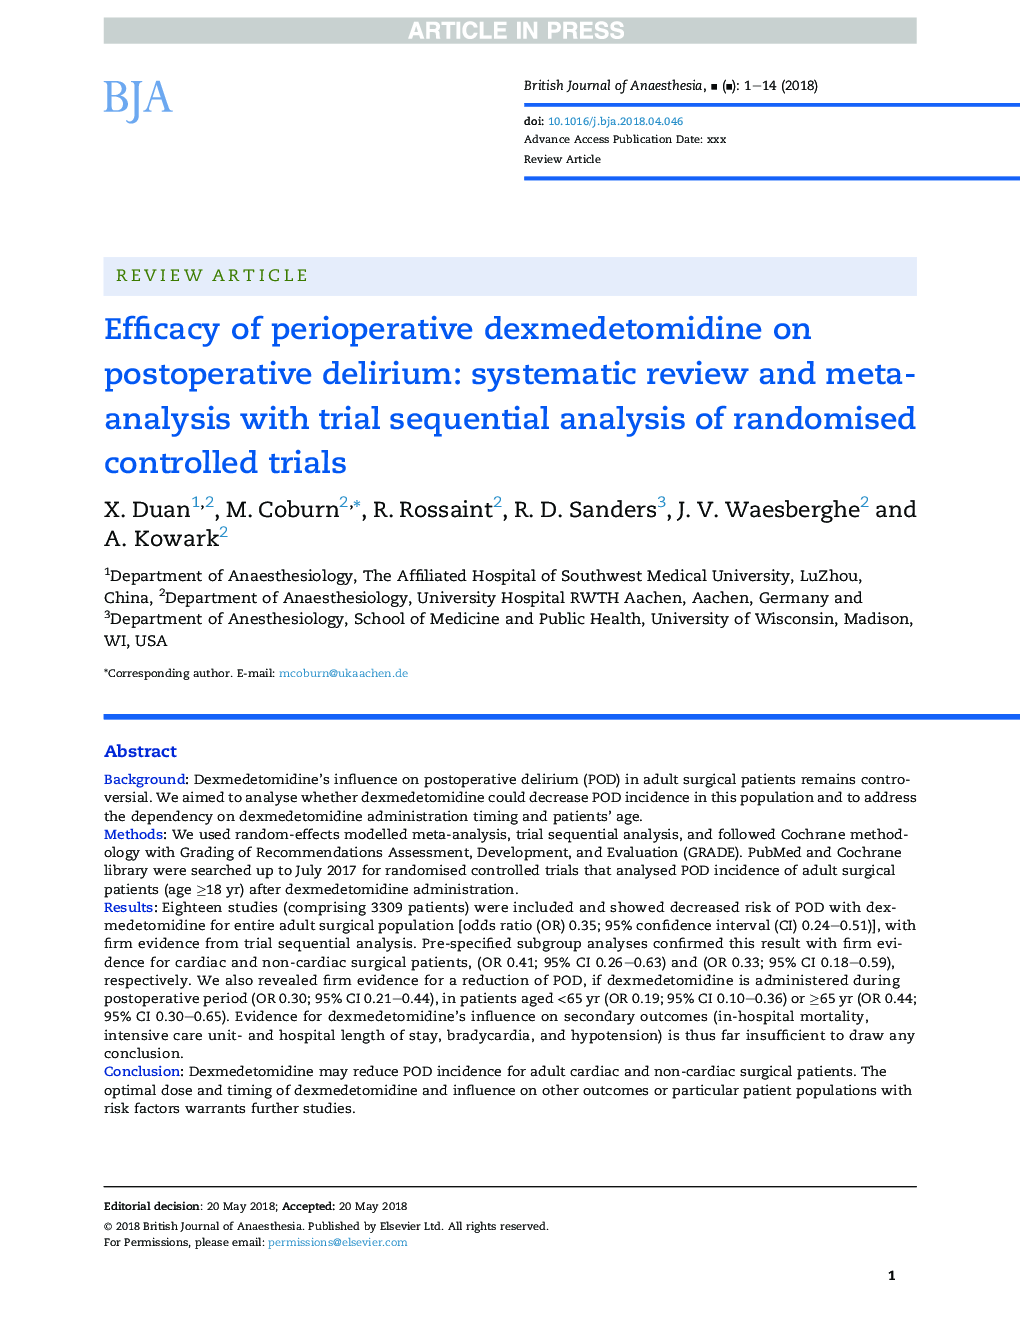 Efficacy of perioperative dexmedetomidine on postoperative delirium: systematic review and meta-analysis with trial sequential analysis of randomised controlled trials